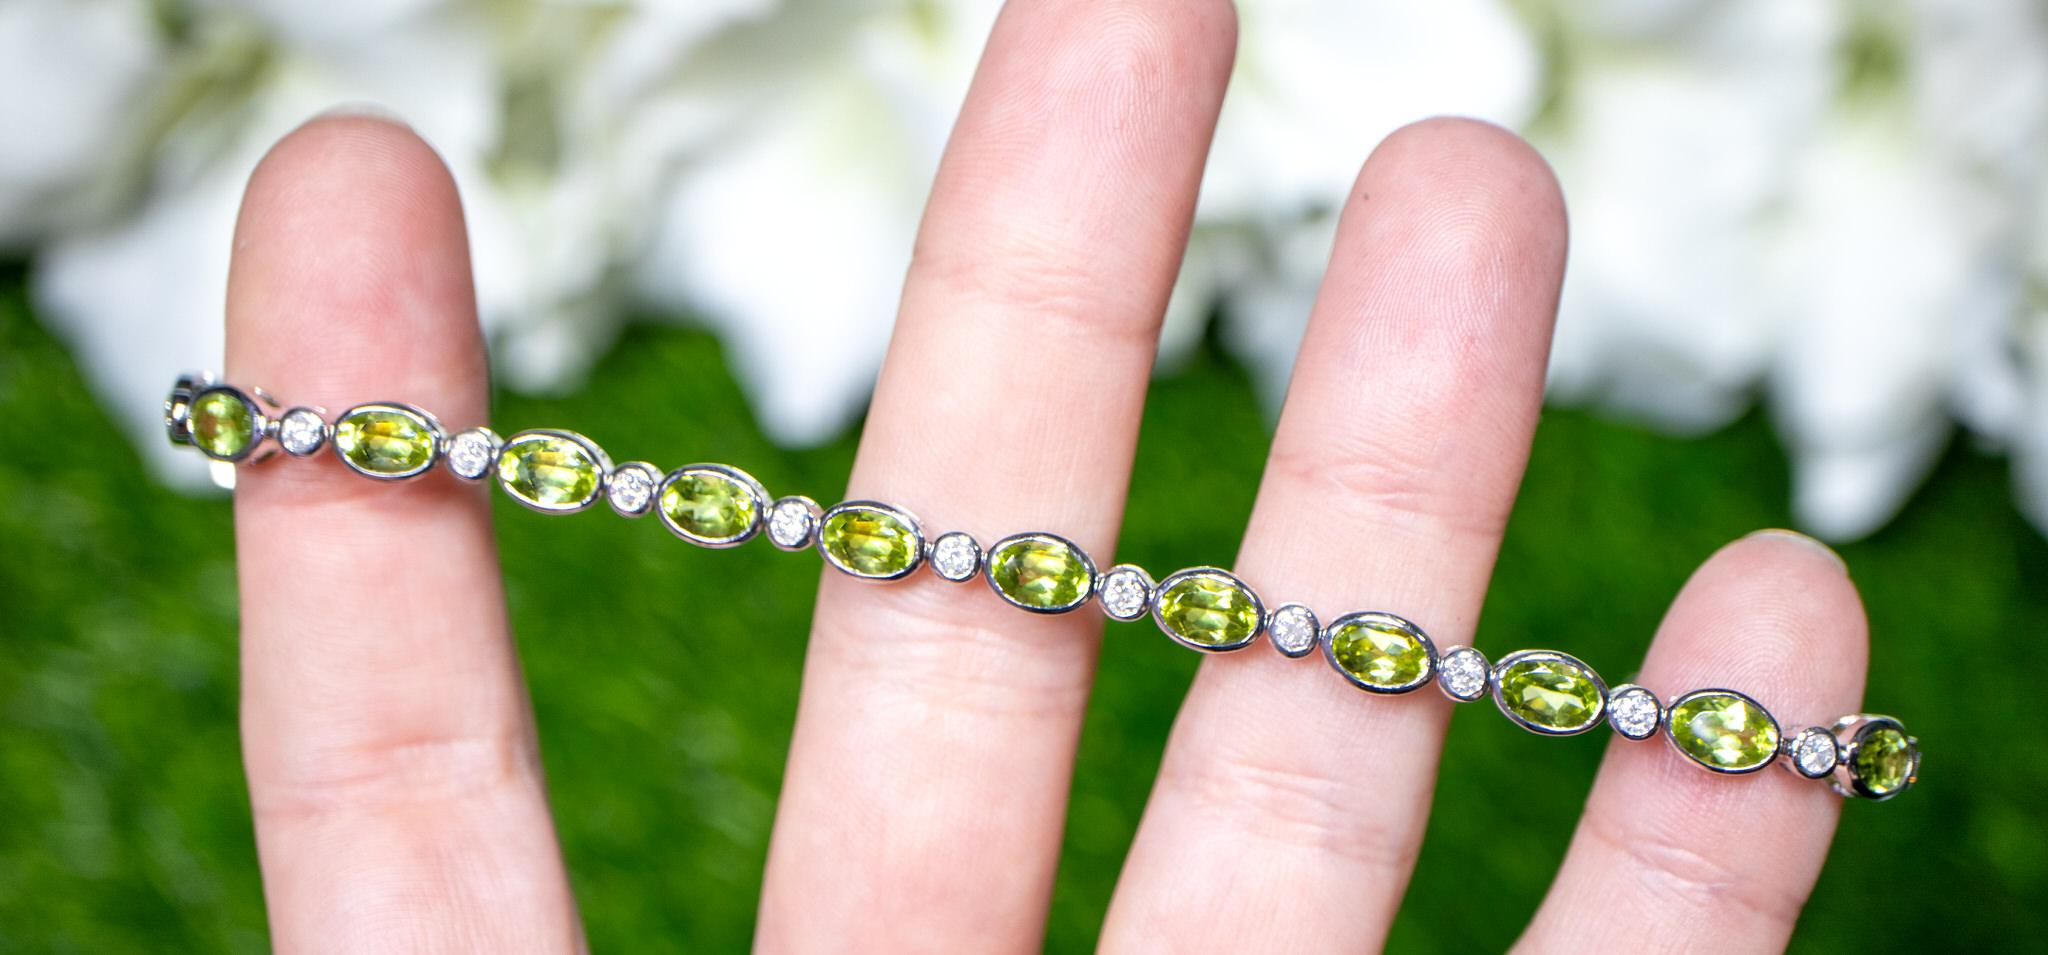 It comes with the Gemological Appraisal by GIA GG/AJP
All Gemstones are Natural
Peridots = 9.15 Carats
Diamonds = 0.87 Carats
Metal: 18K White Gold
Length: 7 Inches
Width: 0.20 Inches